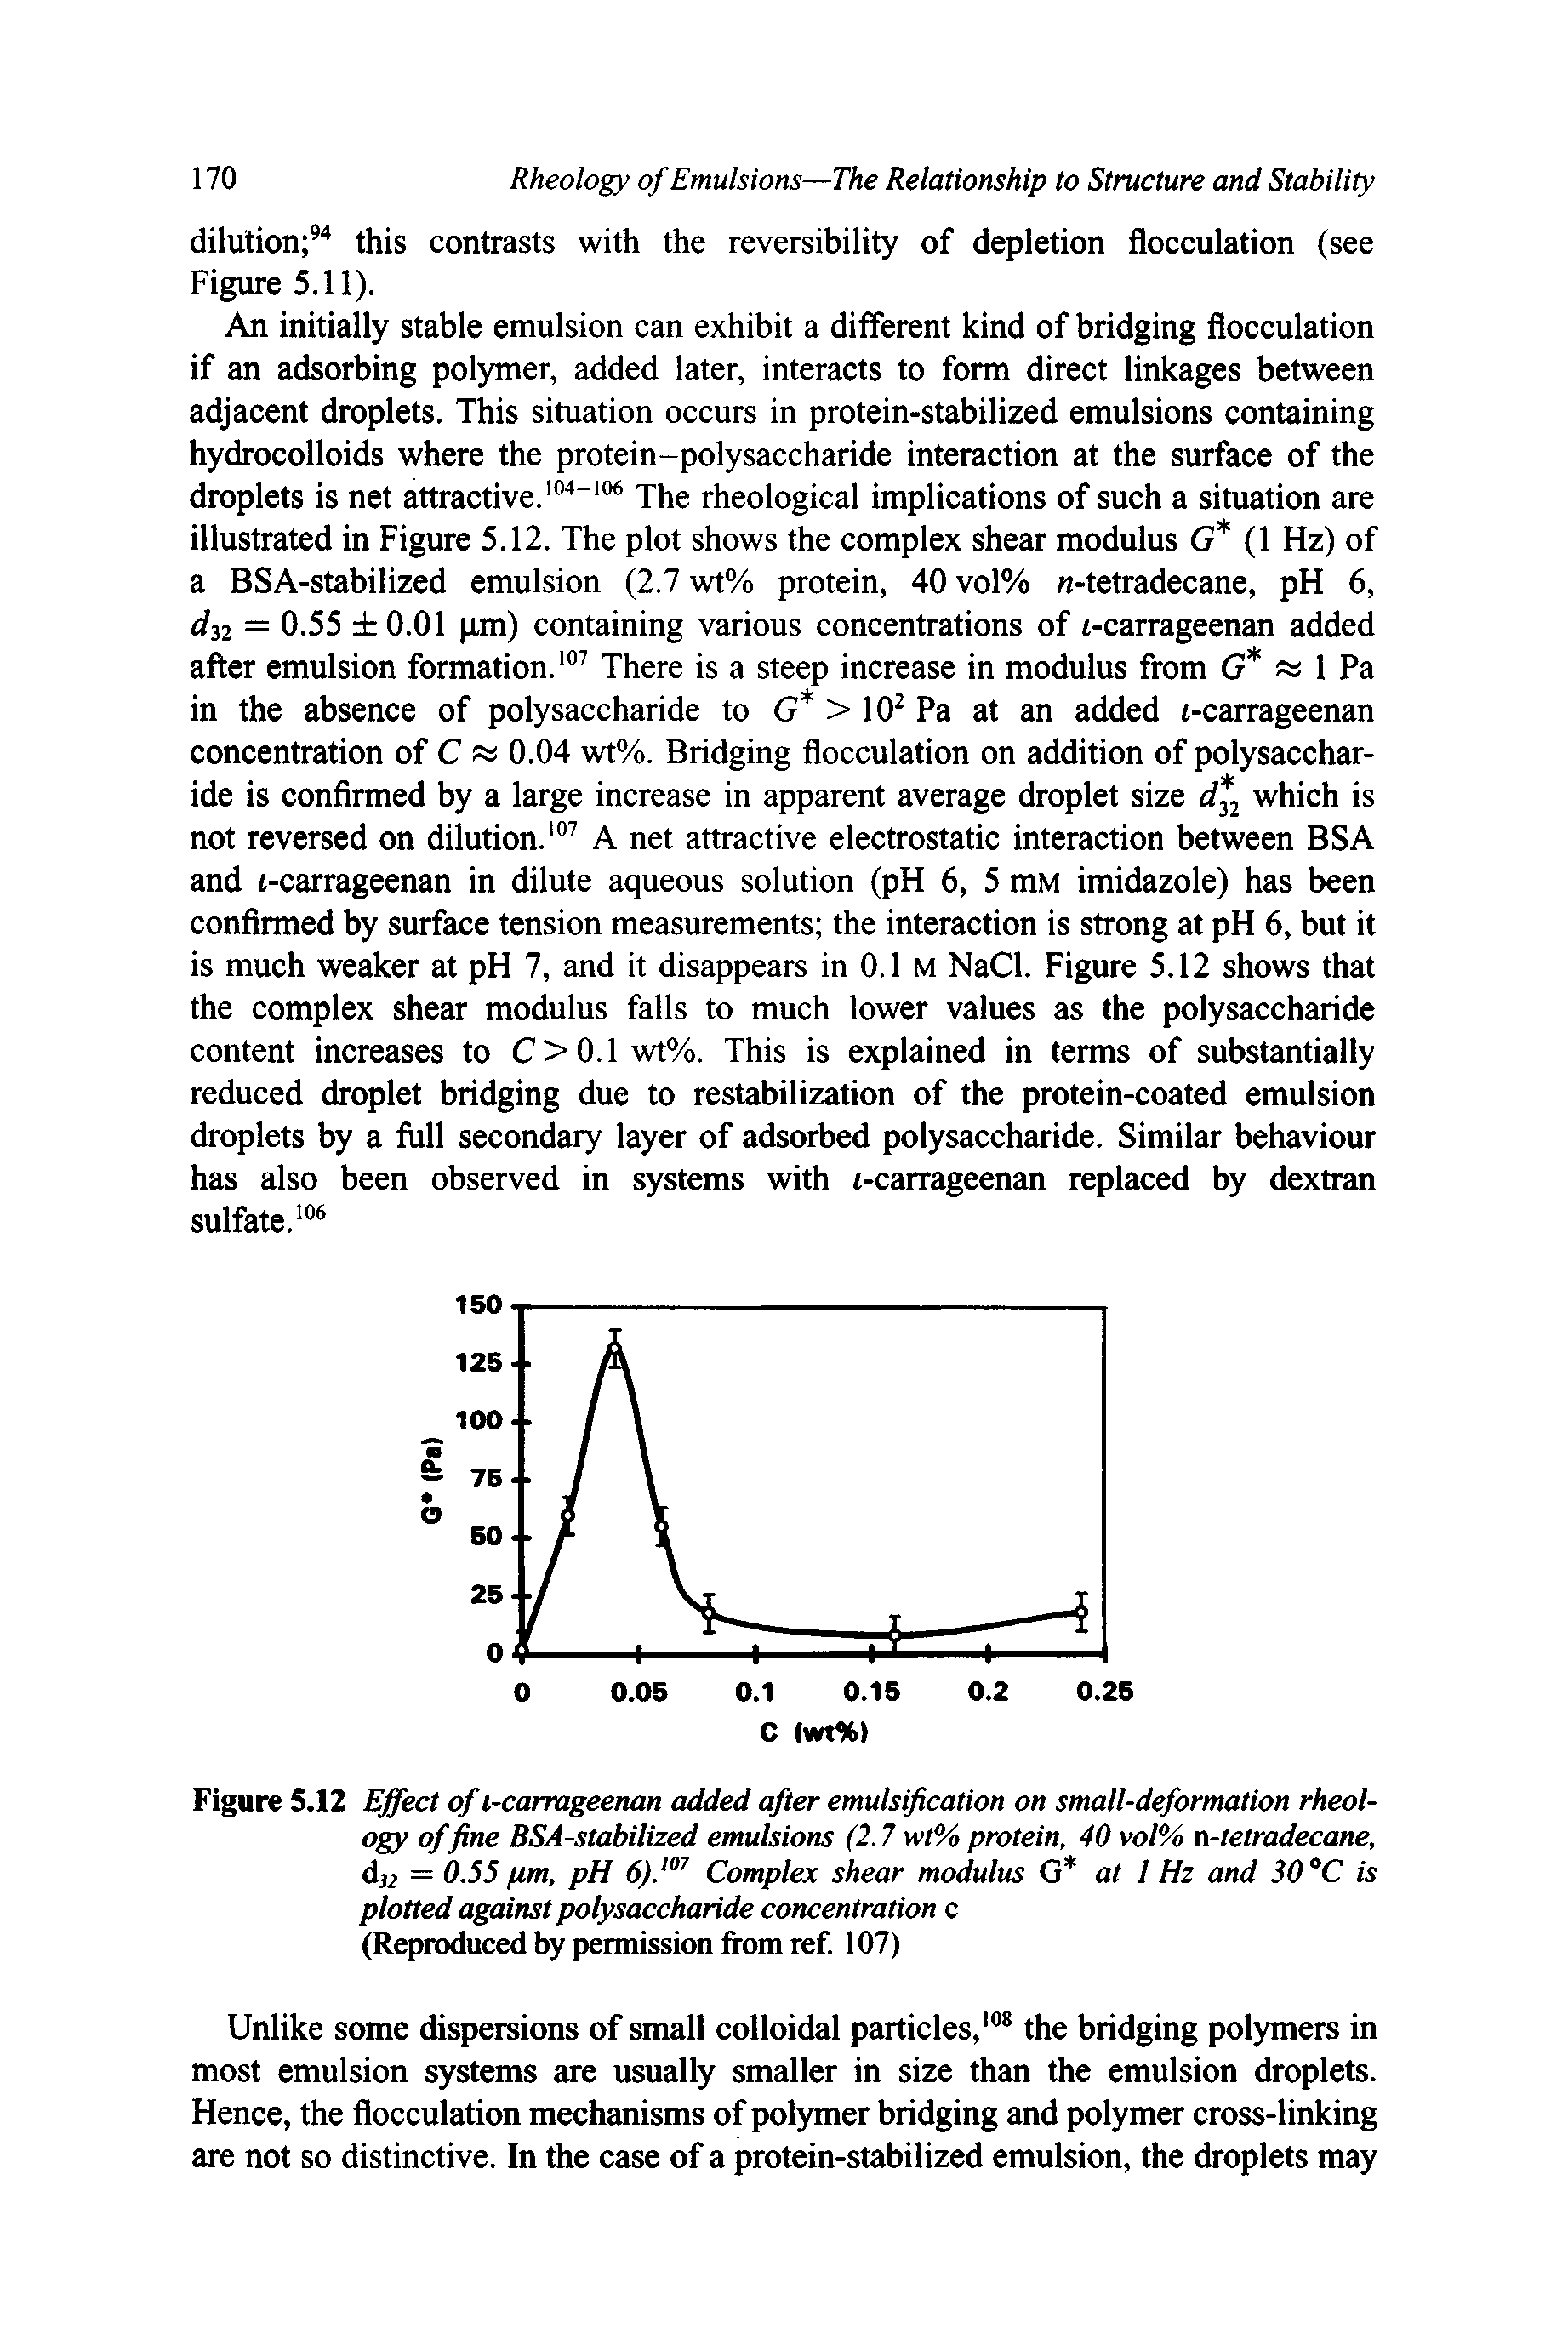 Figure 5.12 Effect of i-carrageenan added after emulsification on small-deformation rheology of fine BSA-stabilized emulsions (2.7 w/% protein, 40 vol% n-tetradecane, dsi = 0.55 pm, pH (5). Complex shear modulus G at I Hz and 30 C is plotted against polysaccharide concentration c (Reproduced by permission from ref. 107)...